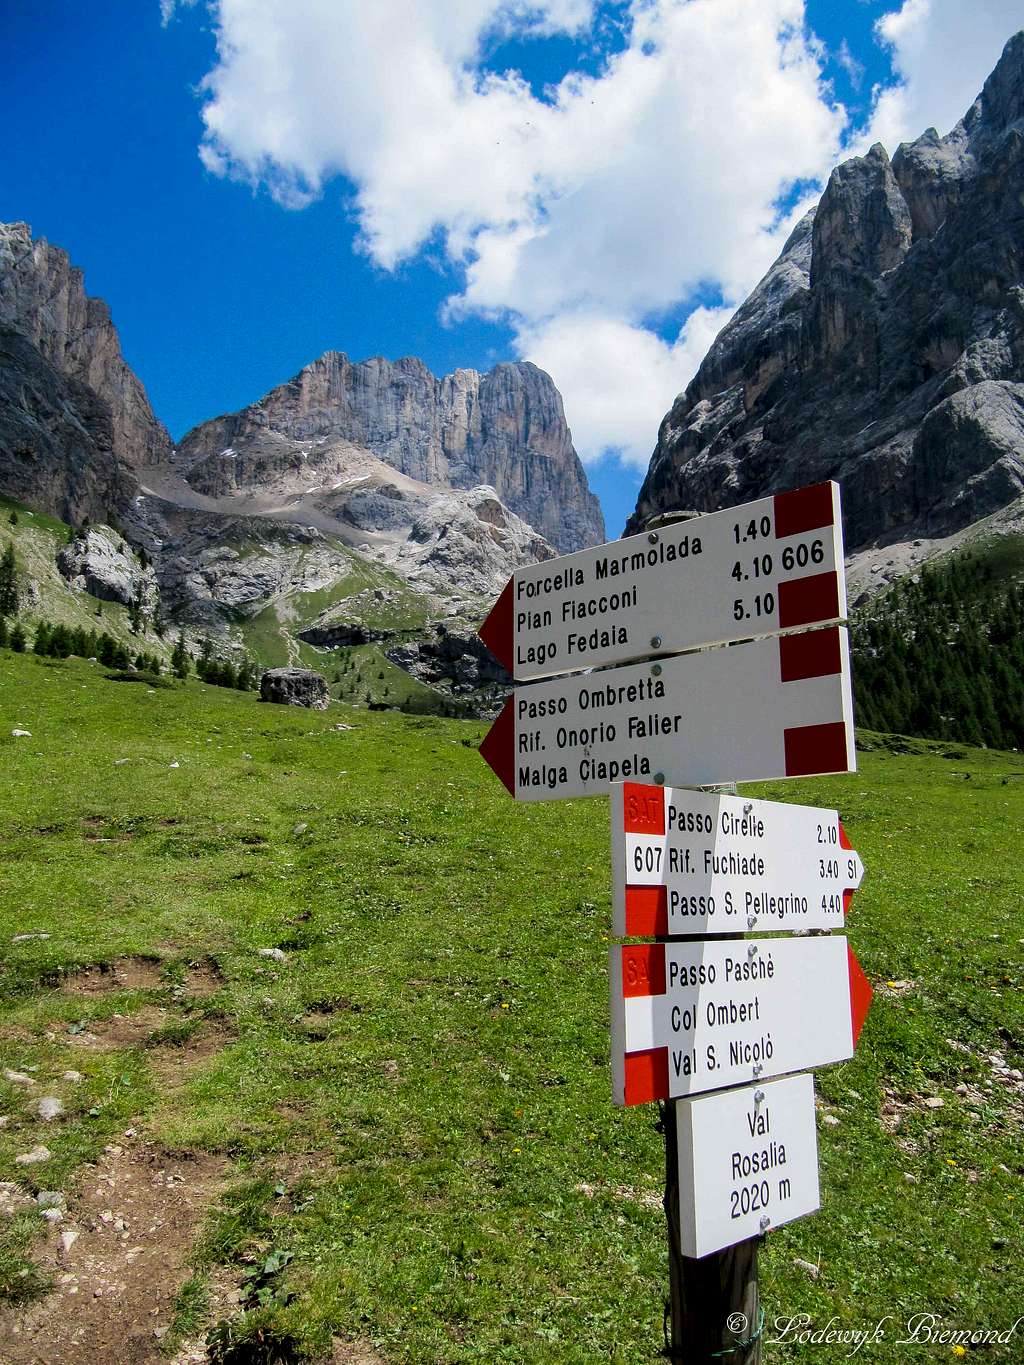 Signpost with Marmolada (3345m)